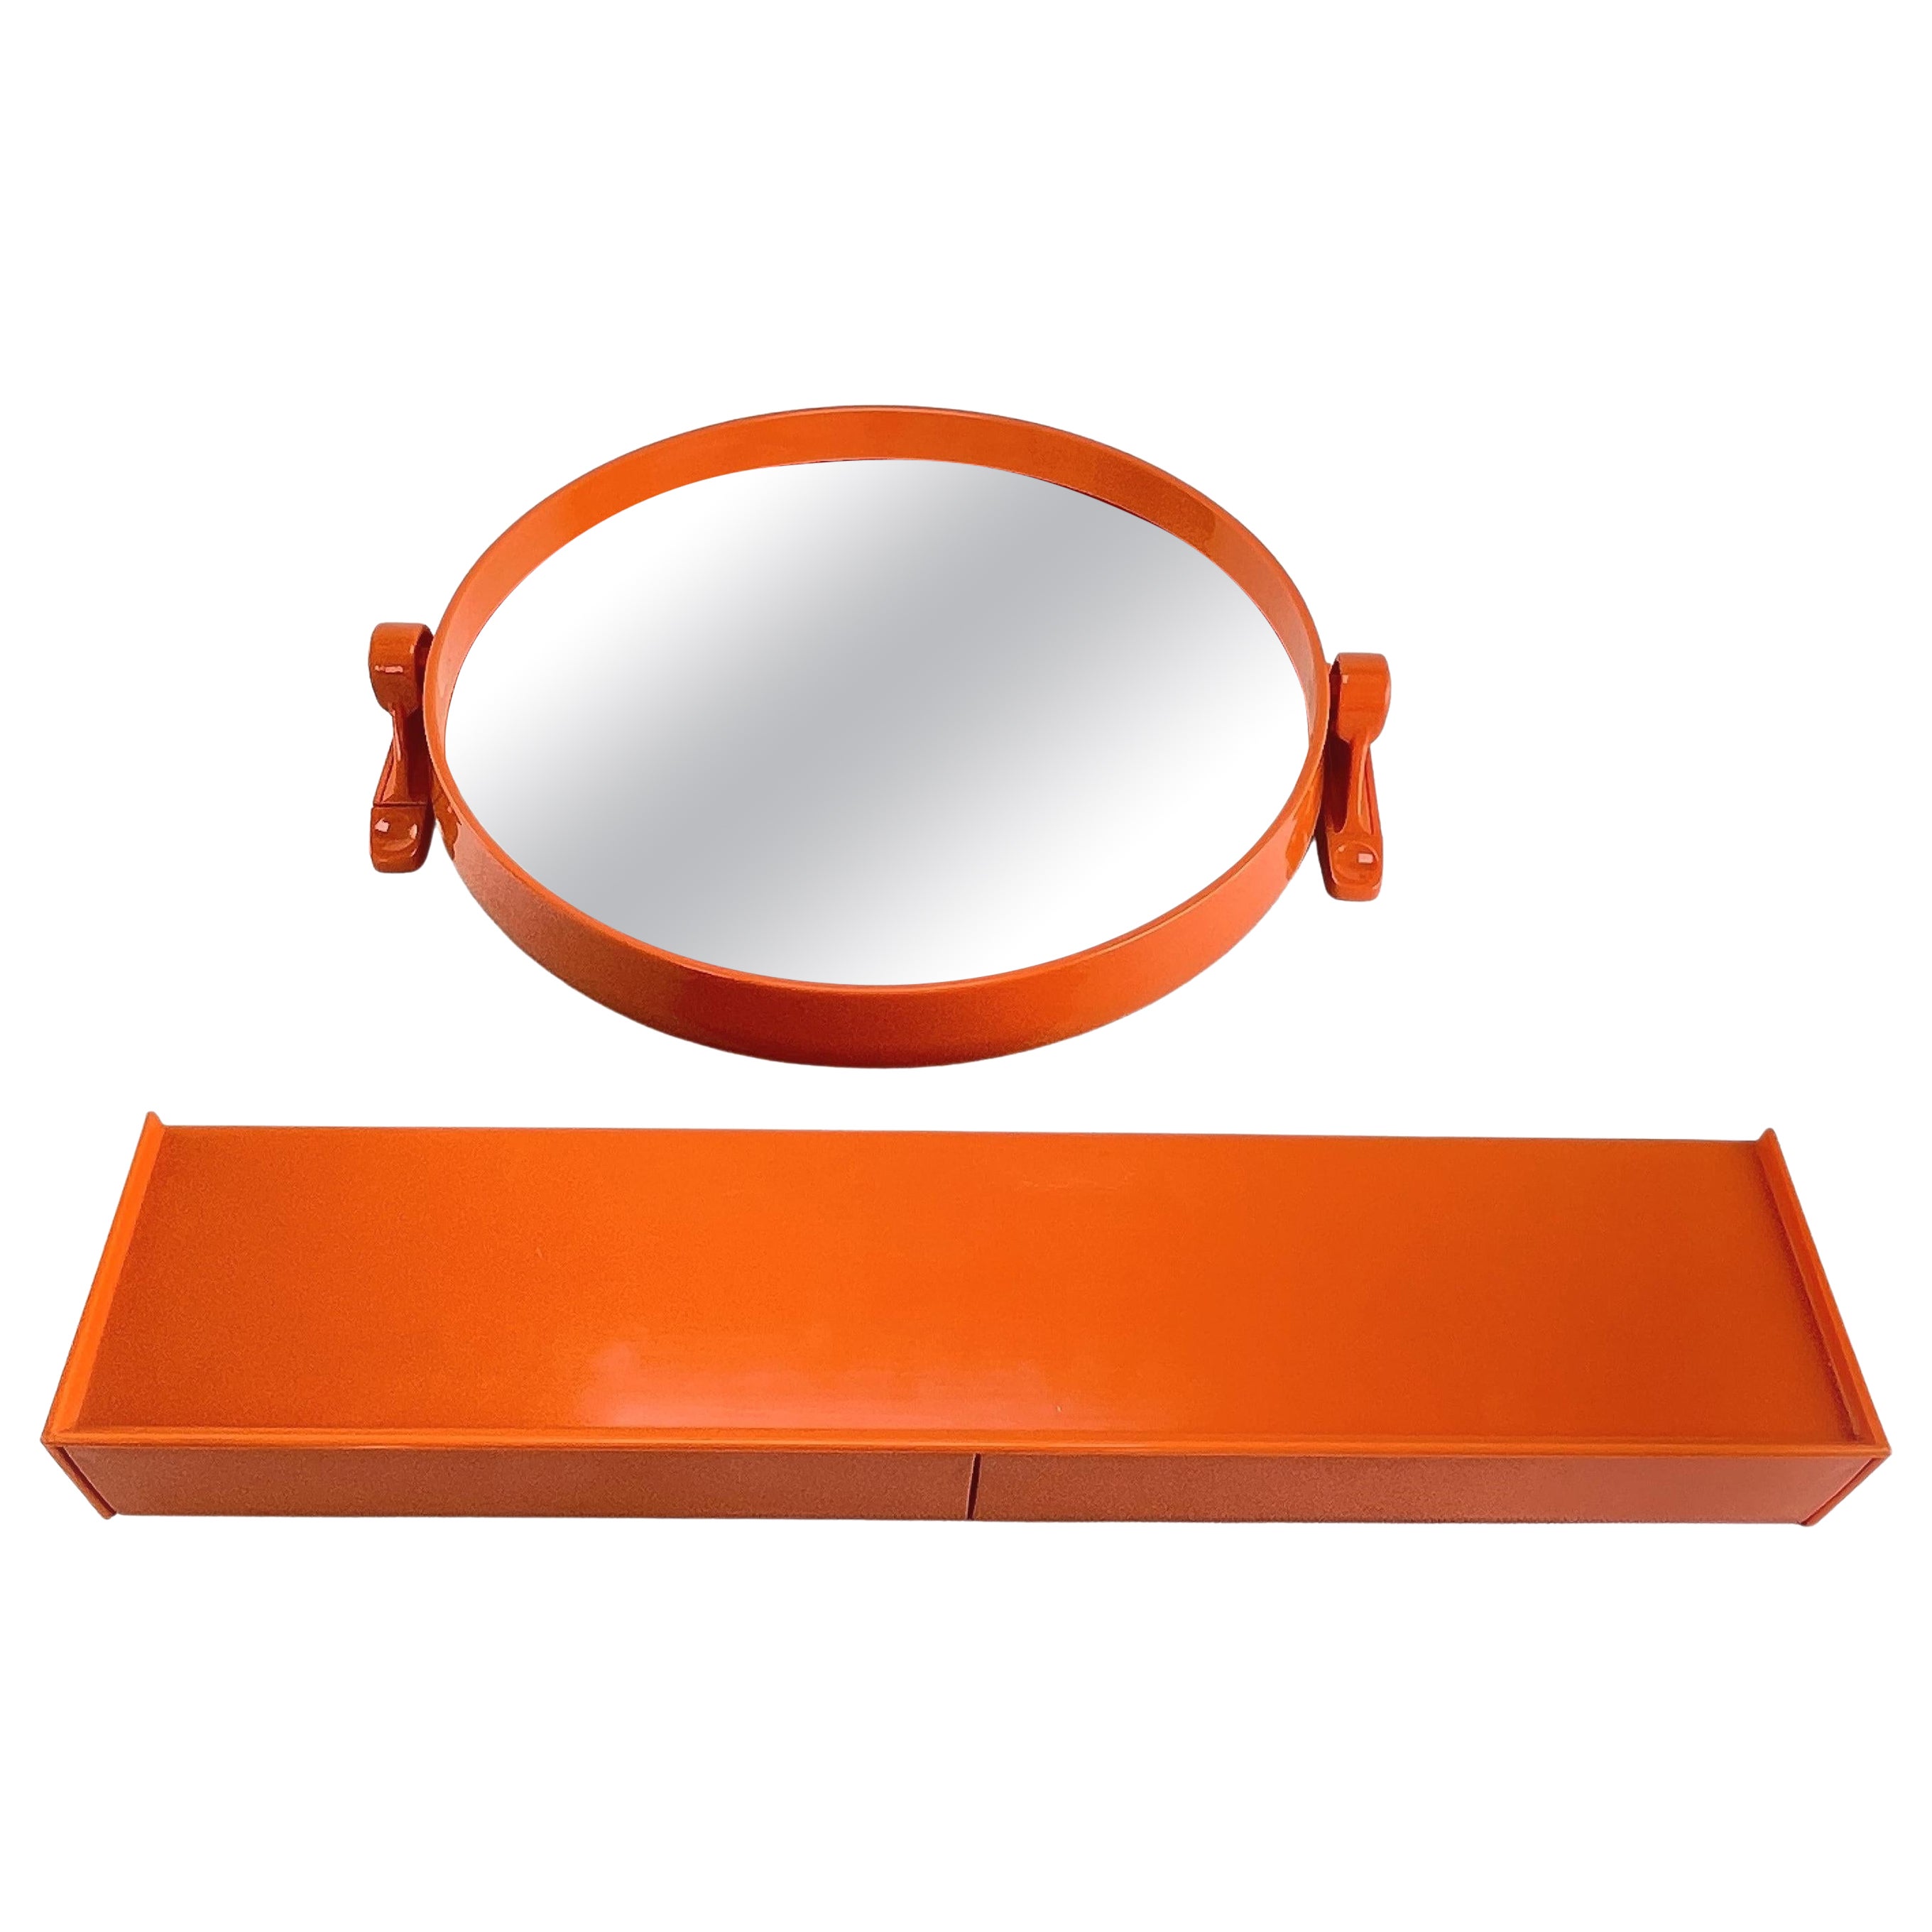 Vintage Wall Mirror with Shelf from Grosfillex France, 1970s For Sale